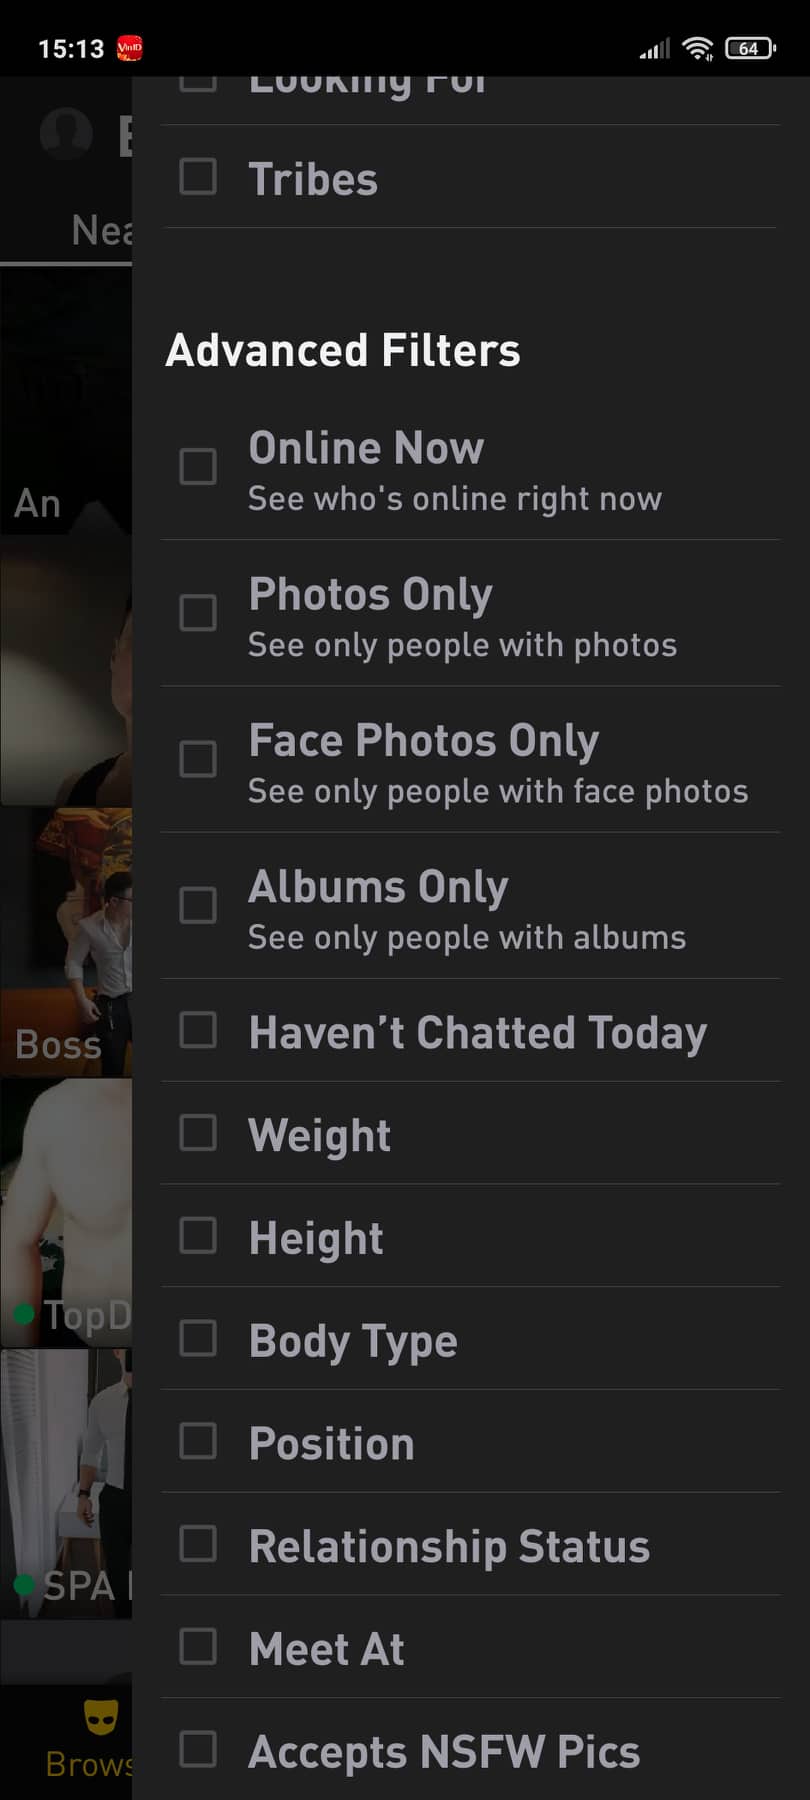 You can filter the profiles according to your preference